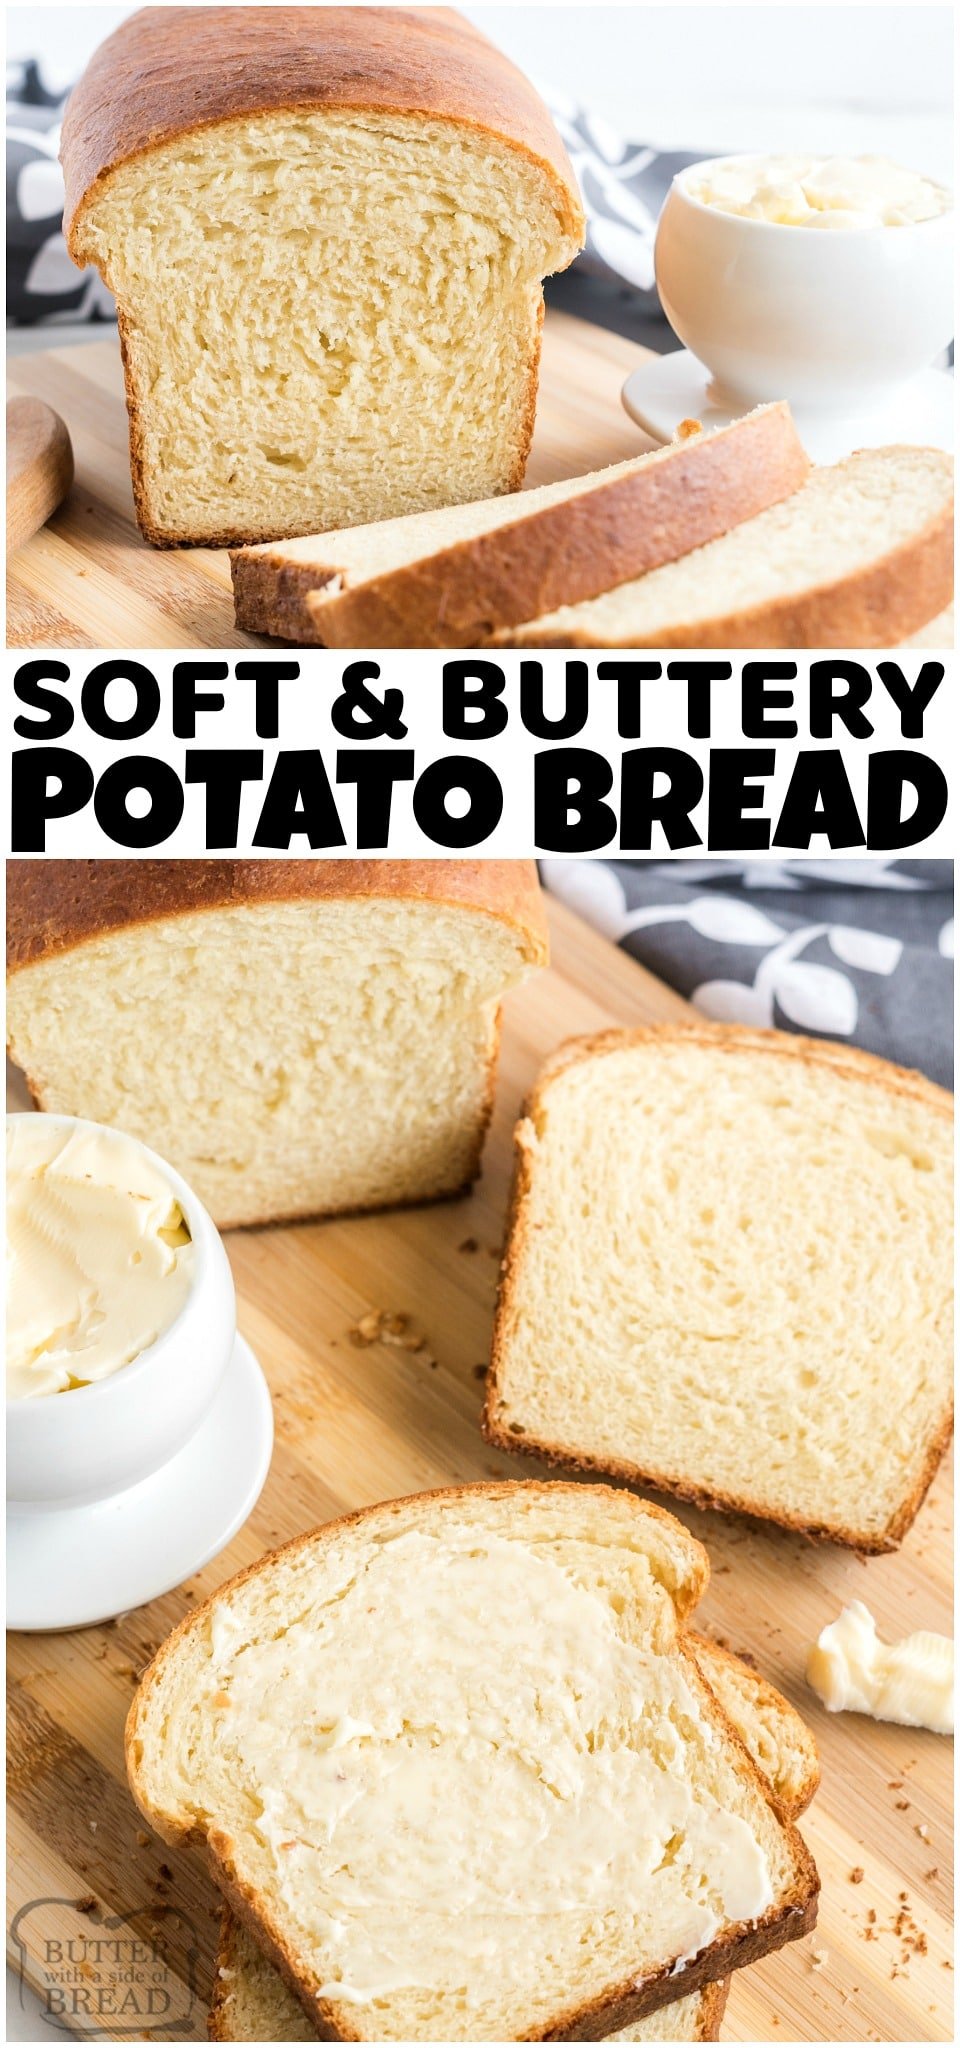 Potato Bread made with mashed potatoes, butter, milk, flour, eggs, and yeast. Potato Bread recipe is a family favorite that's easy to make & has a fantastic homestyle flavor! #bread #homemade #baking #potatoes #mashedpotatoes #potatobread #recipe from BUTTER WITH A SIDE OF BREAD